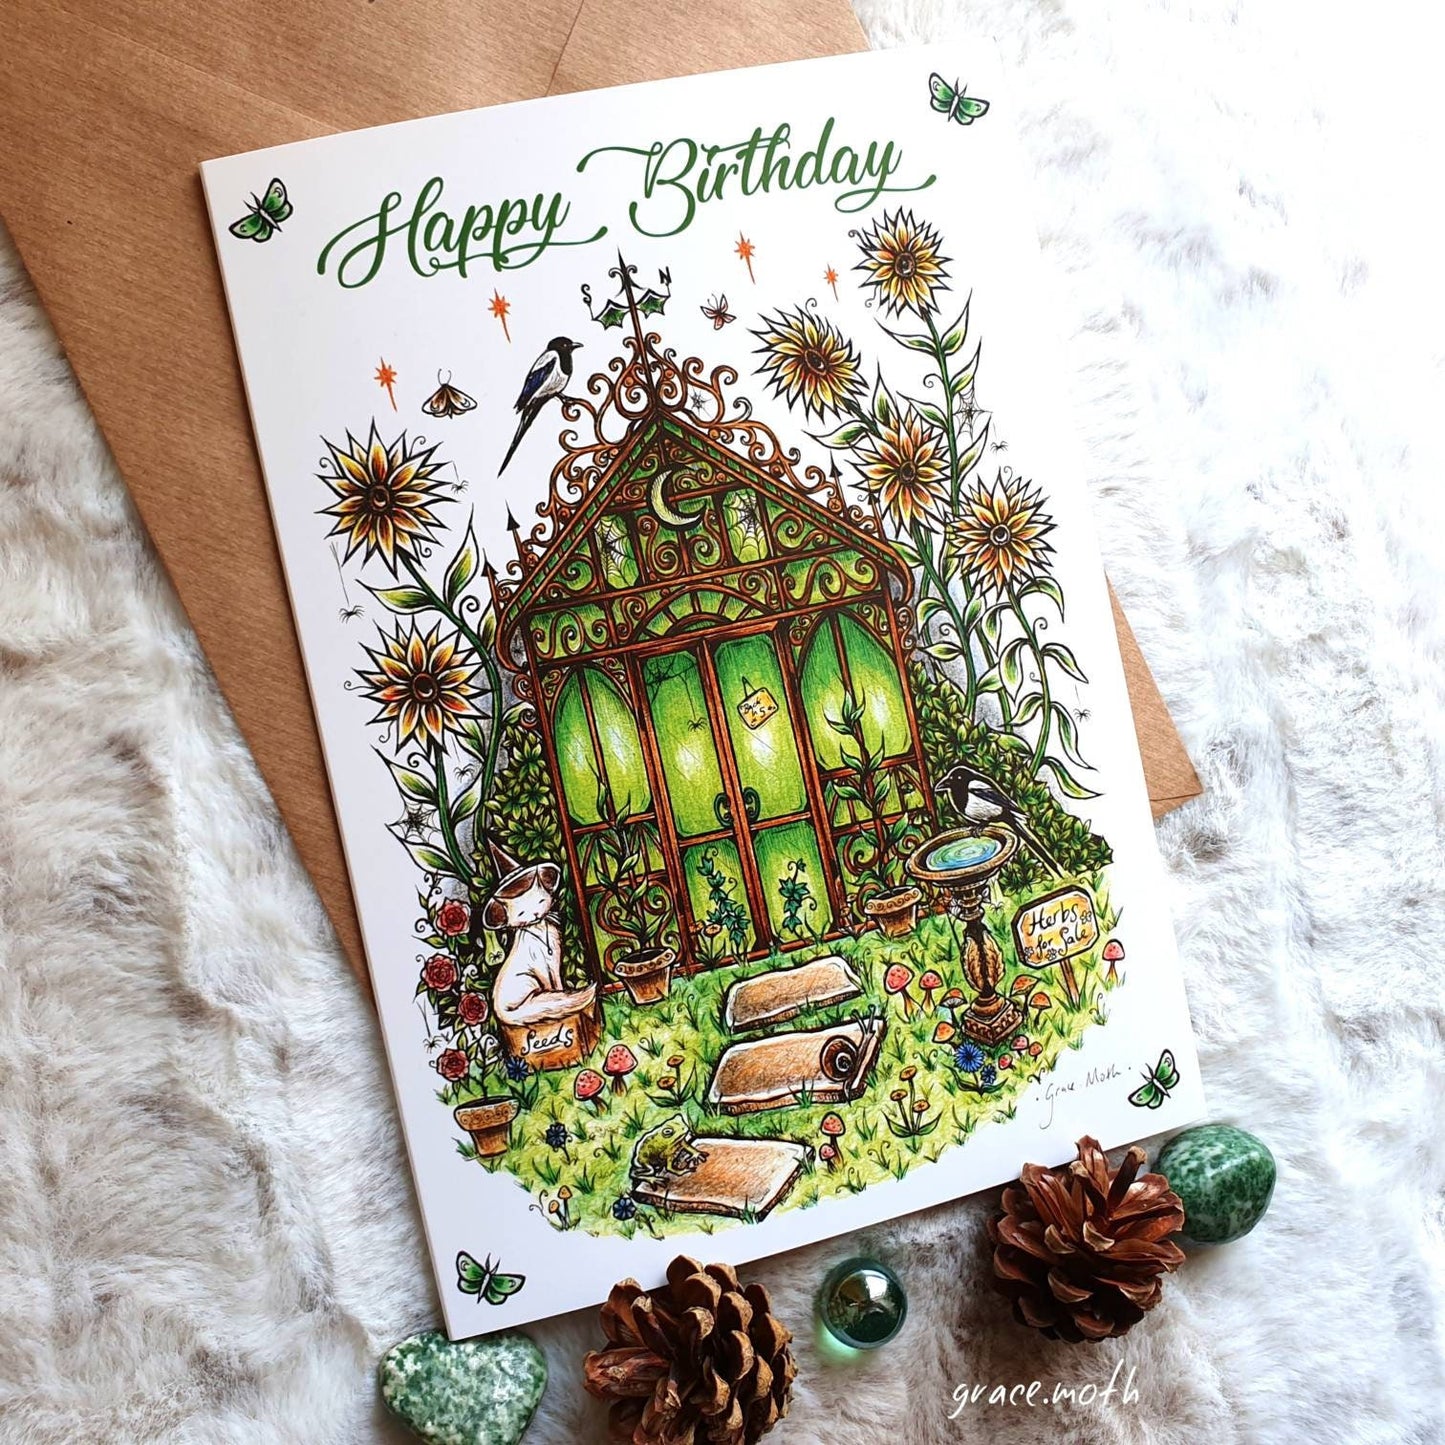 Greenhouse birthday - A5 greeting card by Grace Moth - 5.8 x 8.3